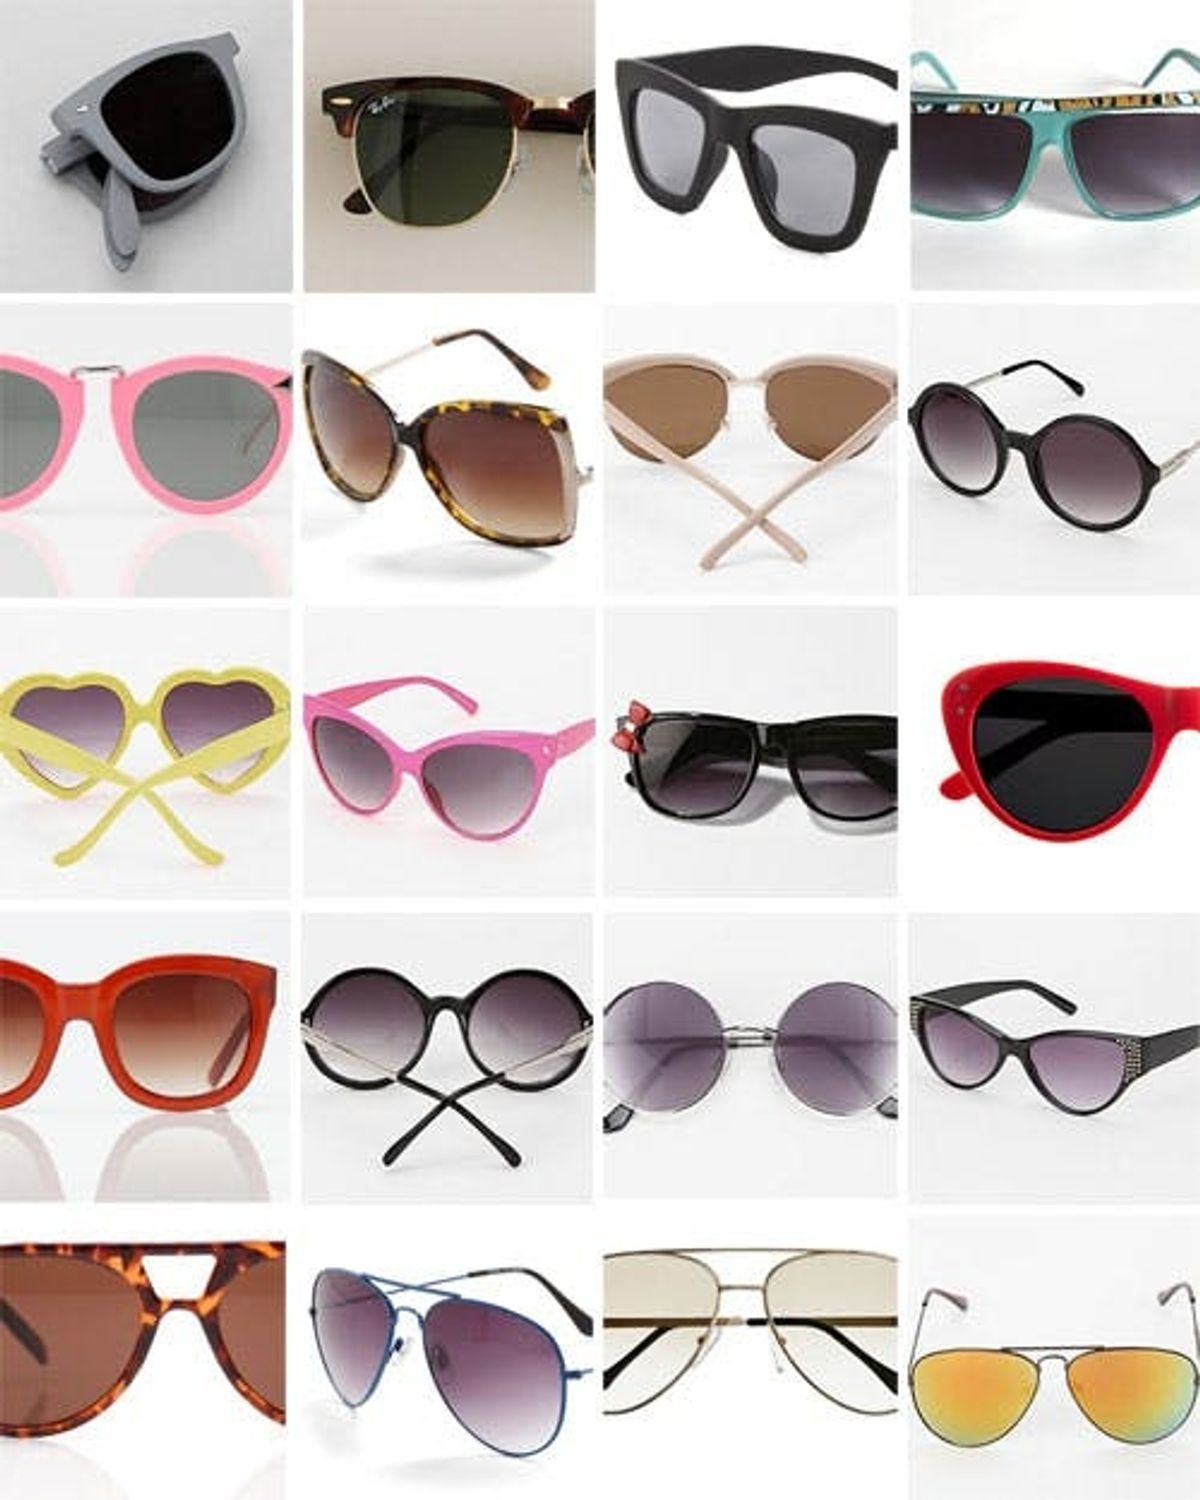 You Don’t Want to Miss These Sizzling Summer Sunglasses